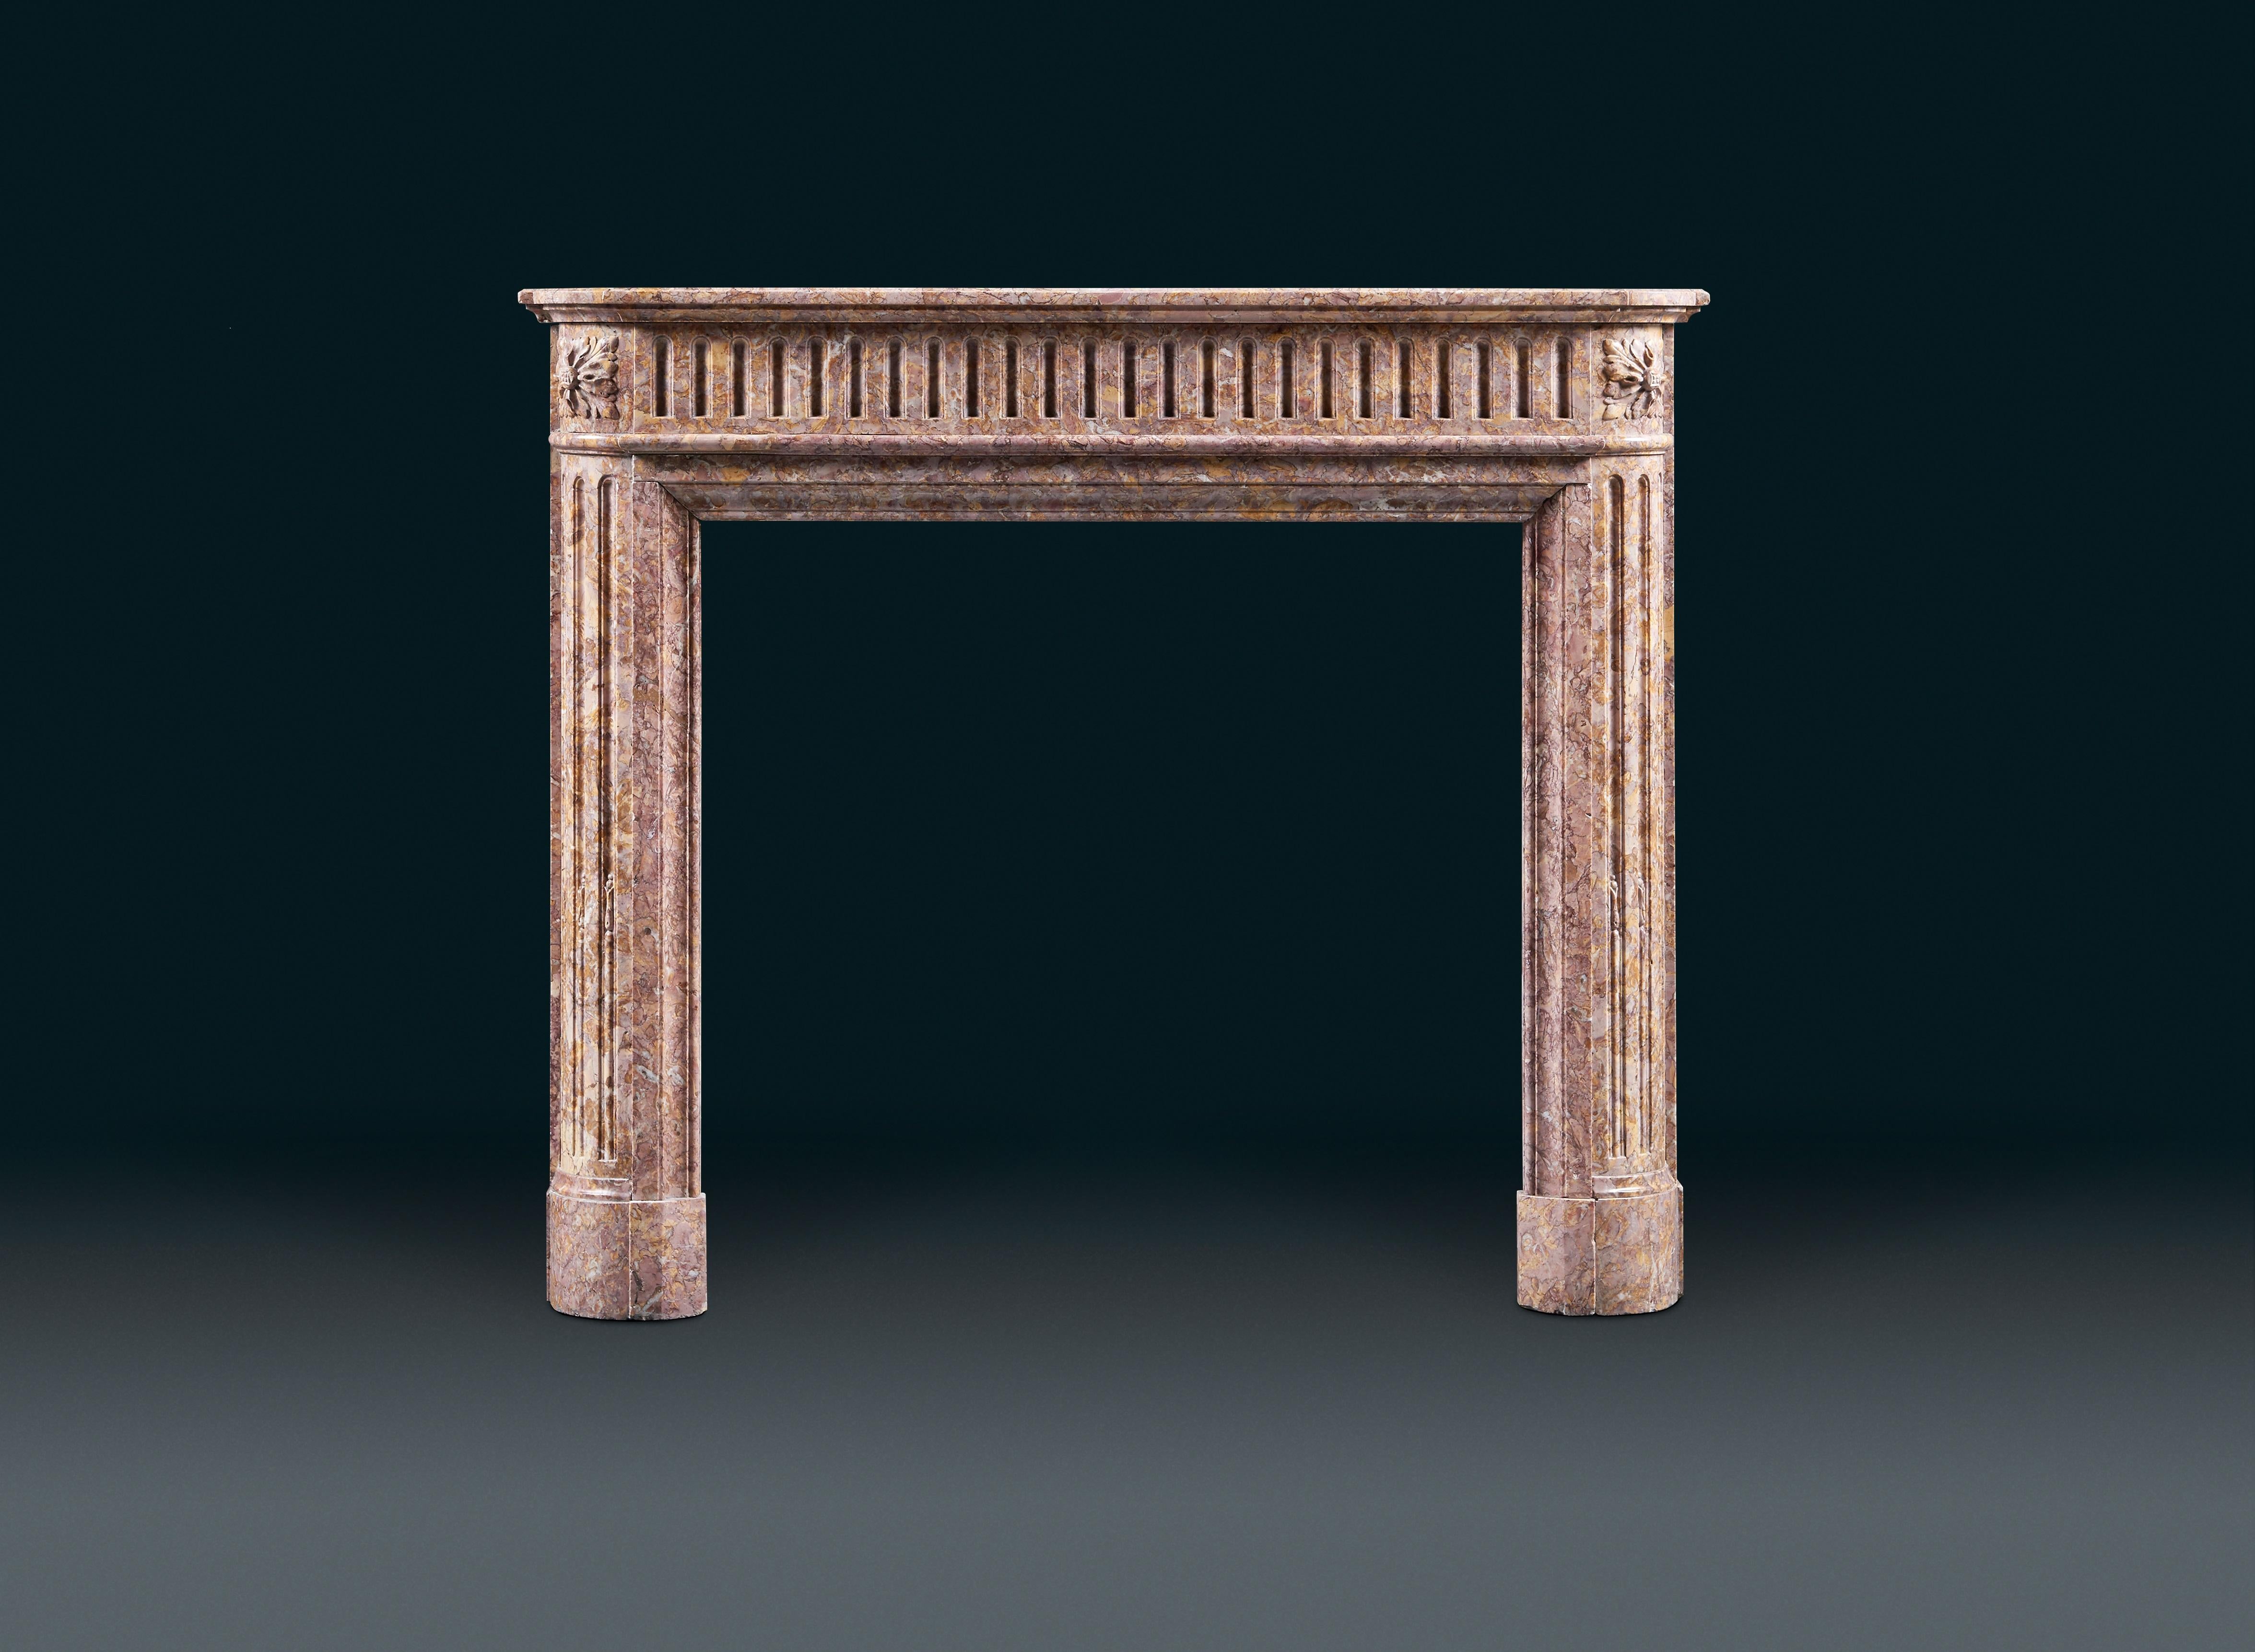 A French 19th century, Louis XVI style antique fireplace mantel in Spanish Brocatello marble. The slightly bowed frieze with continuous finger fluted decoration. The canted jambs with vertical flutes surmounted by carved flower heads.